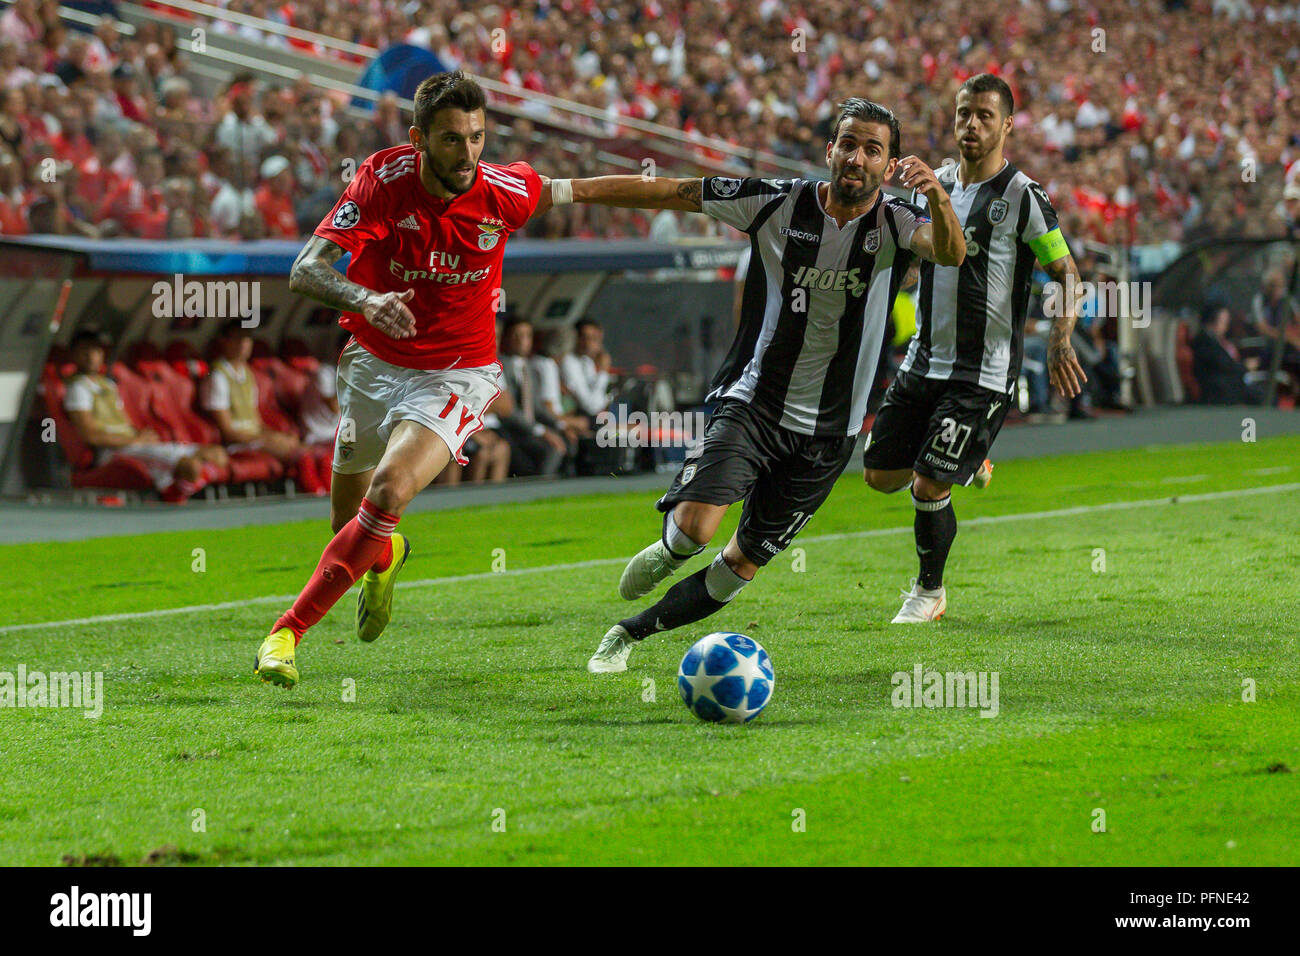 Lisbon, Portugal. August 21, 2018. Benfica's forward from Argentina Facundo  Ferreyra (19) and PAOK's defender from Spain Jose Angel Crespo (15) during  the game of the 1st leg of the Playoffs of